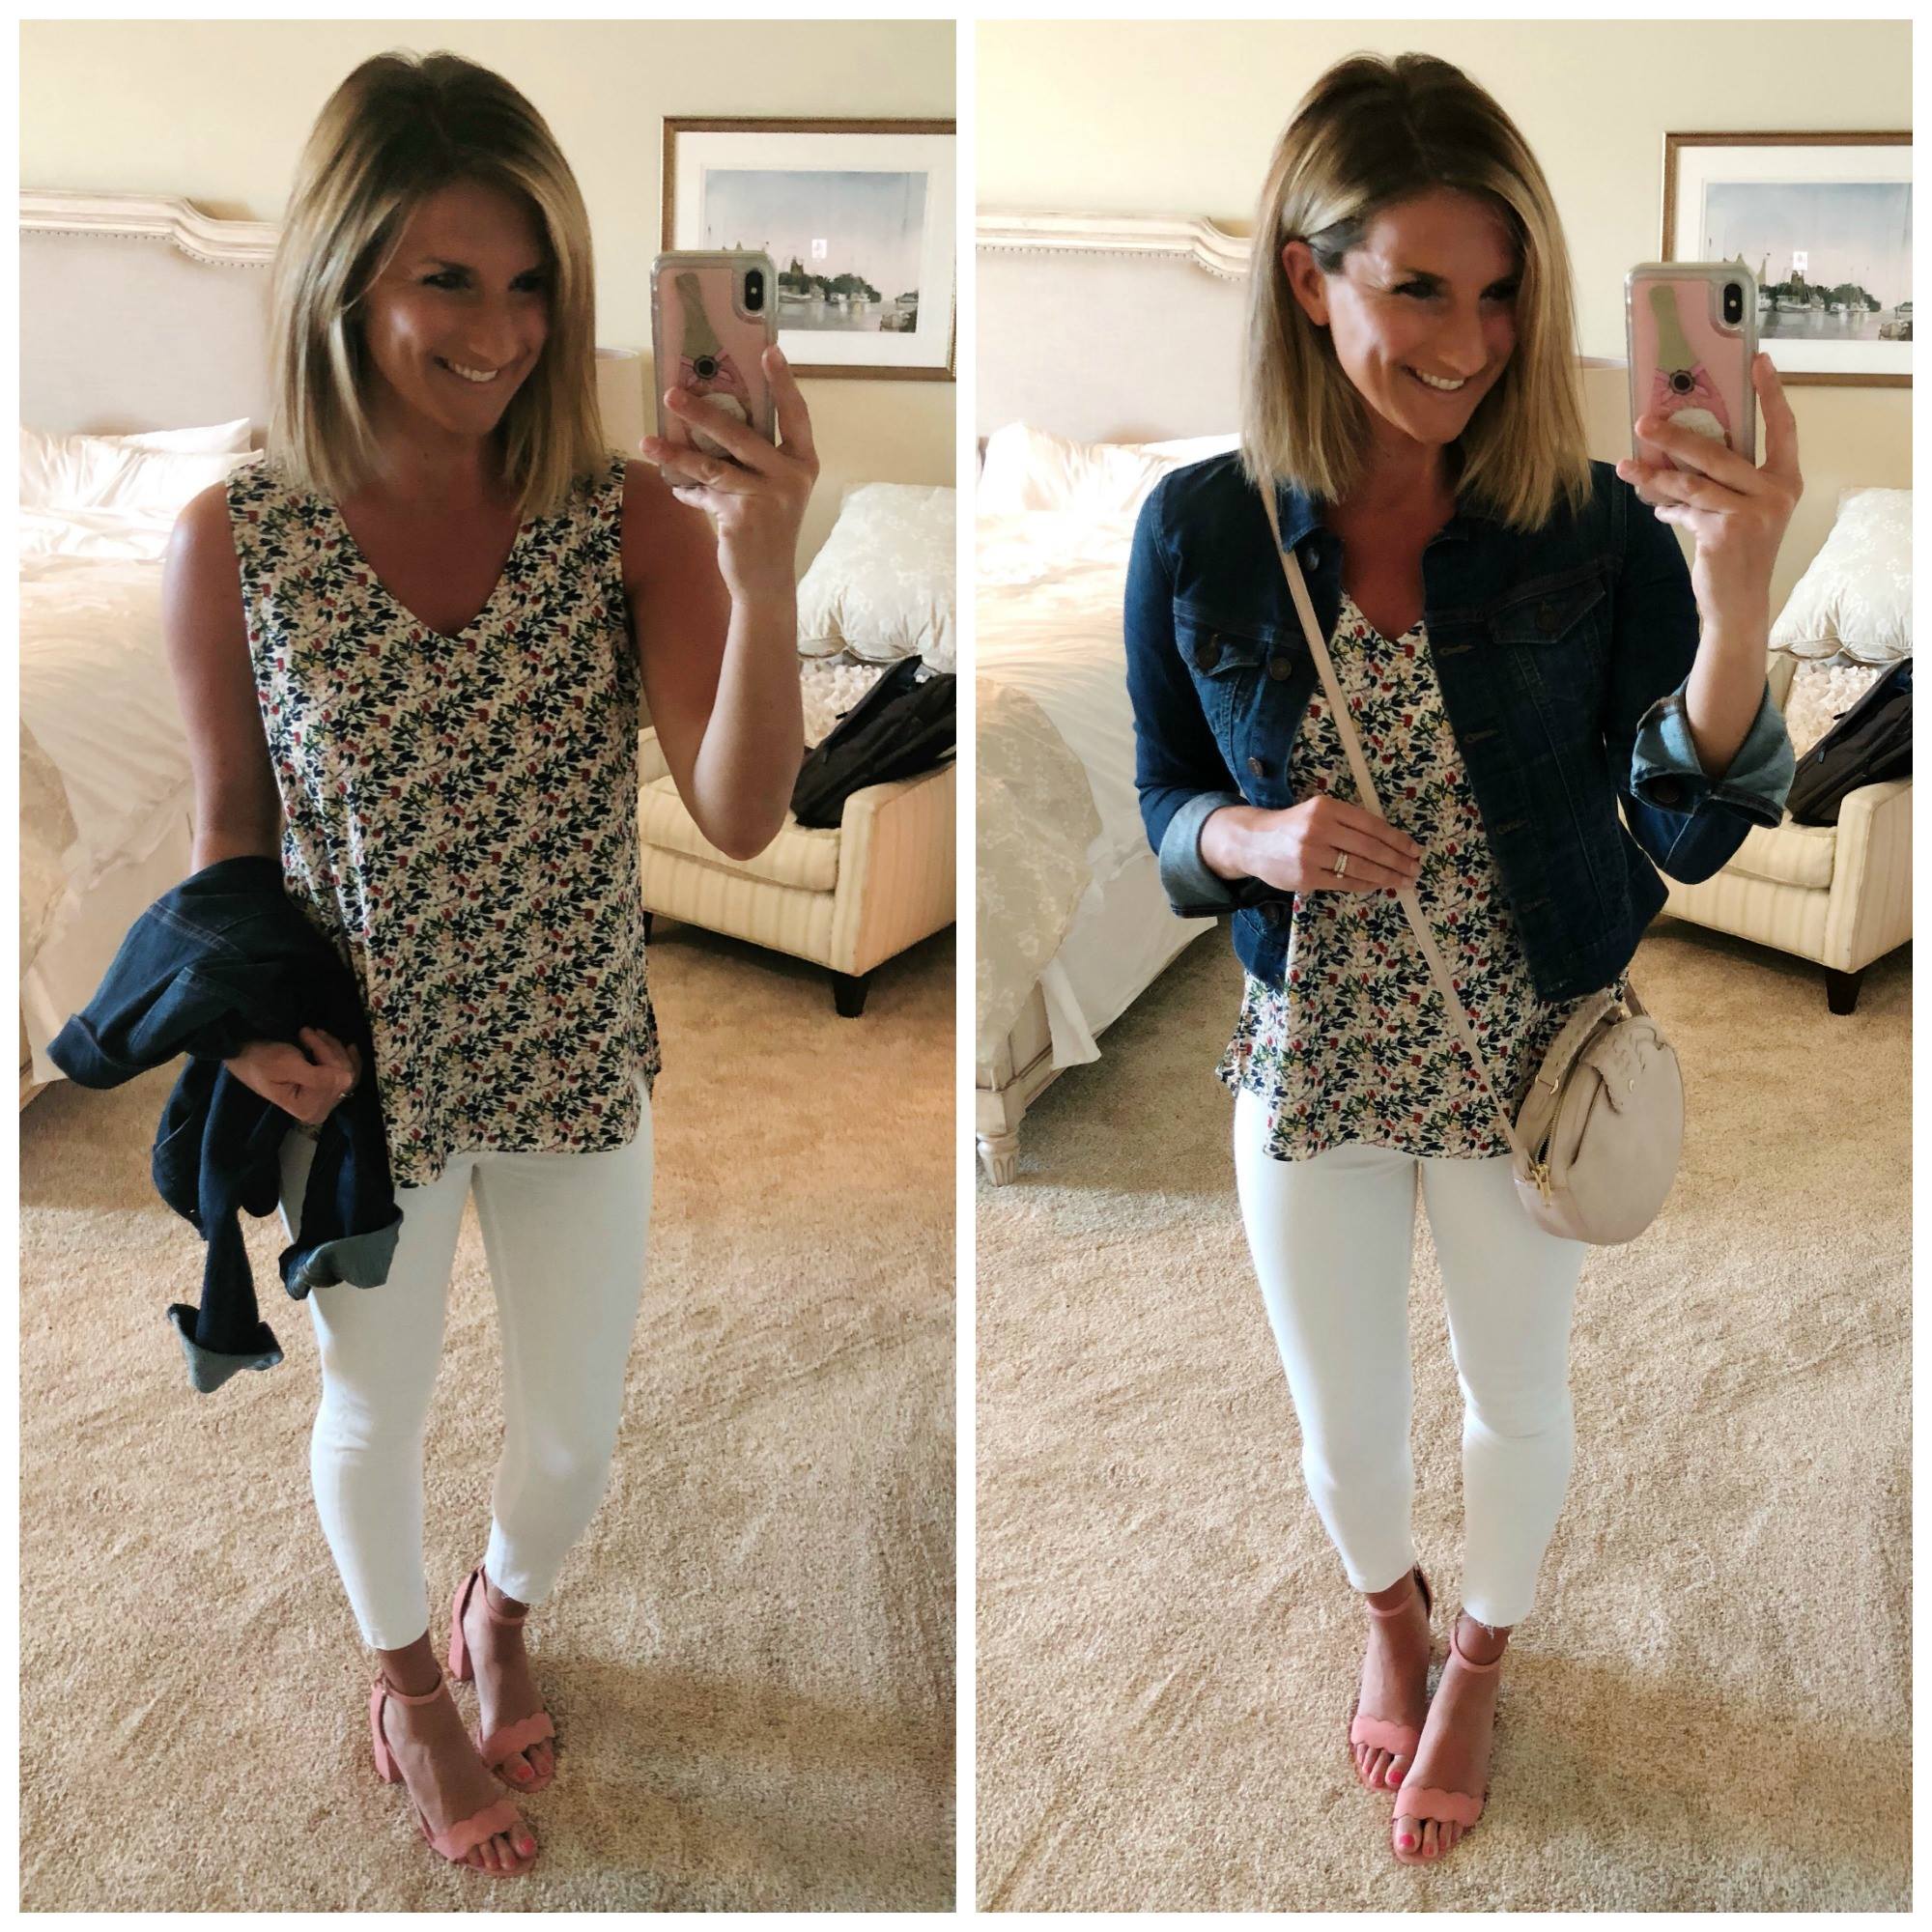 Perfect Spring Outfit // Floral Tank + White Jeggings + Heeled Sandals + Jean Jacket + Crossbody Purse // Spring Fashion